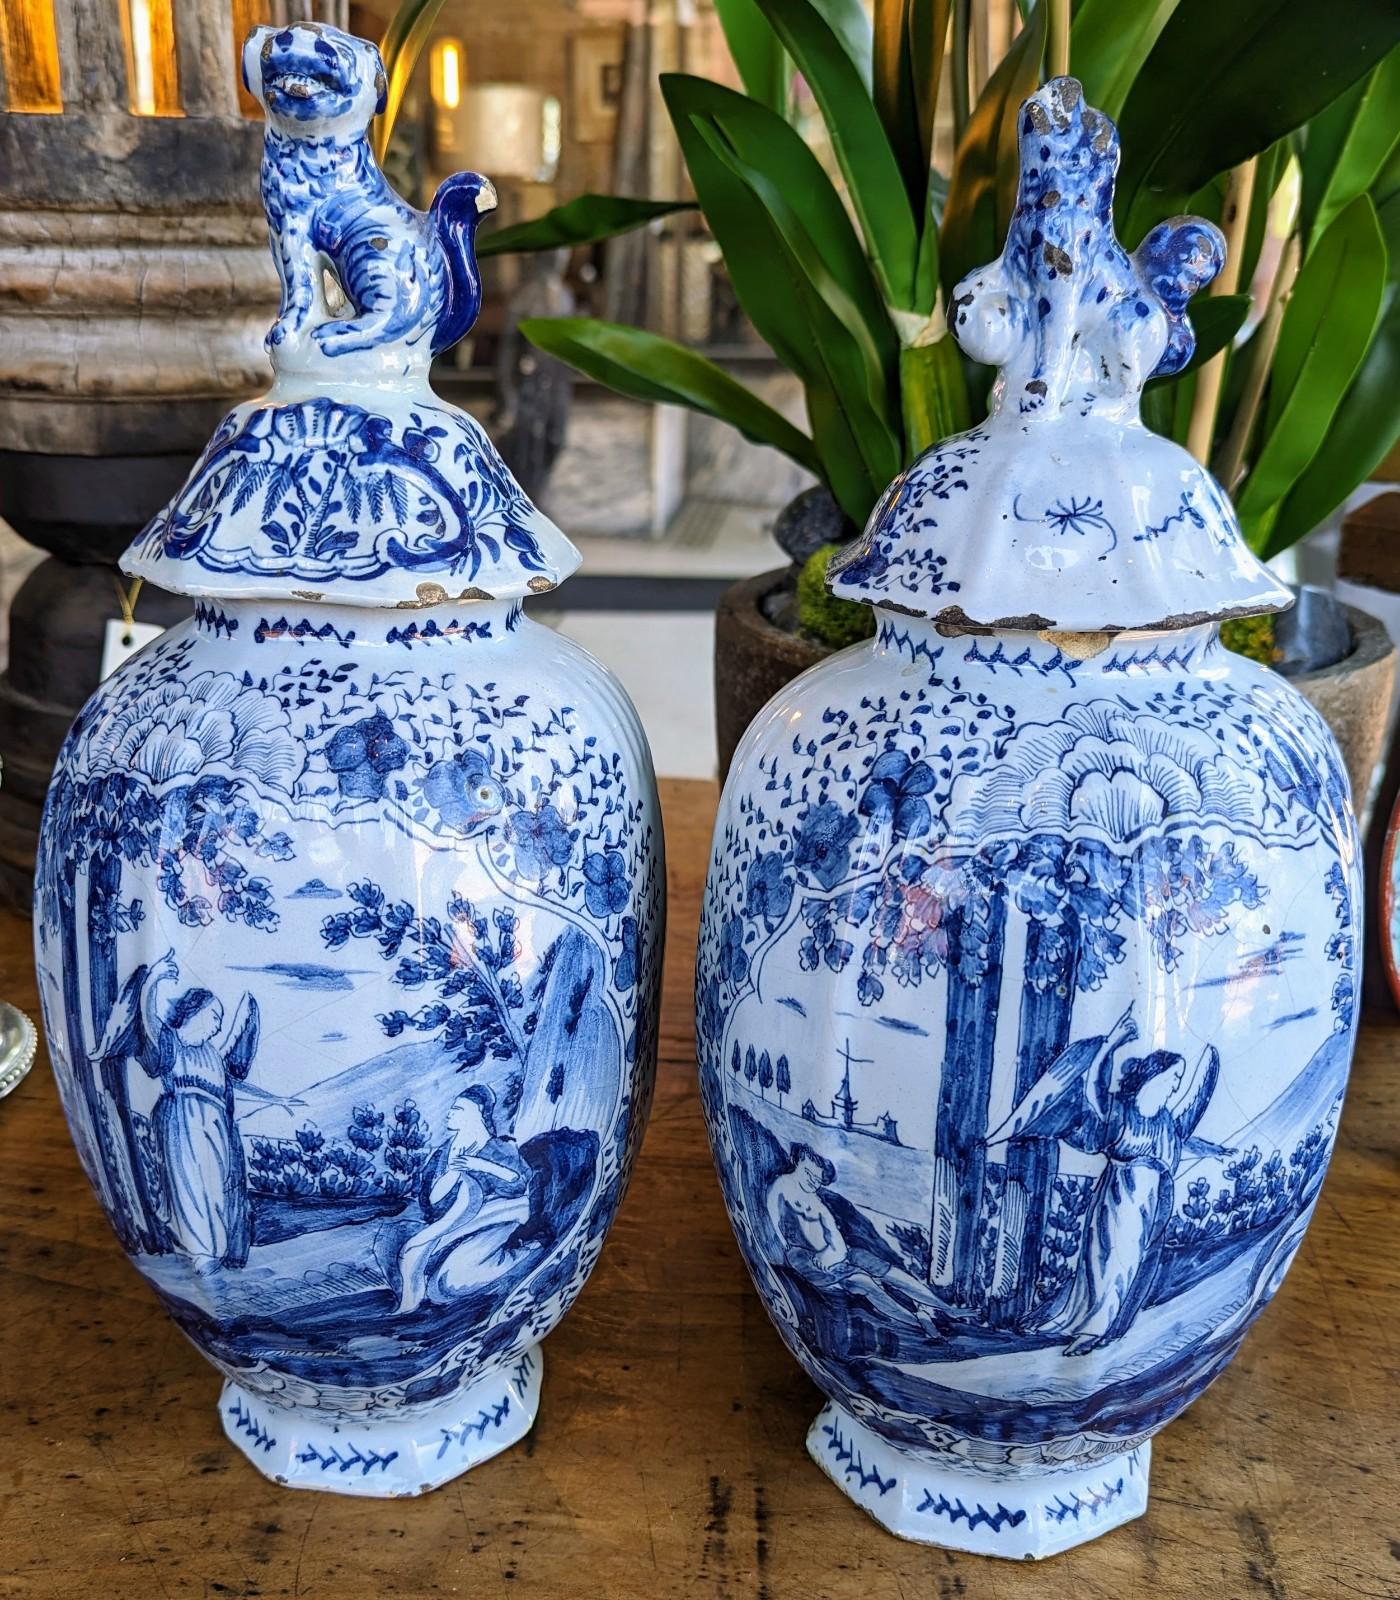 Stunning pair of antique European Chinoiserie jars featuring imagery depicting an angel pointing toward the Heavens (possibly Dutch made in Holland). Created from porcelain with glazing, and hand painted with a unique scenery. The gorgeous blue and